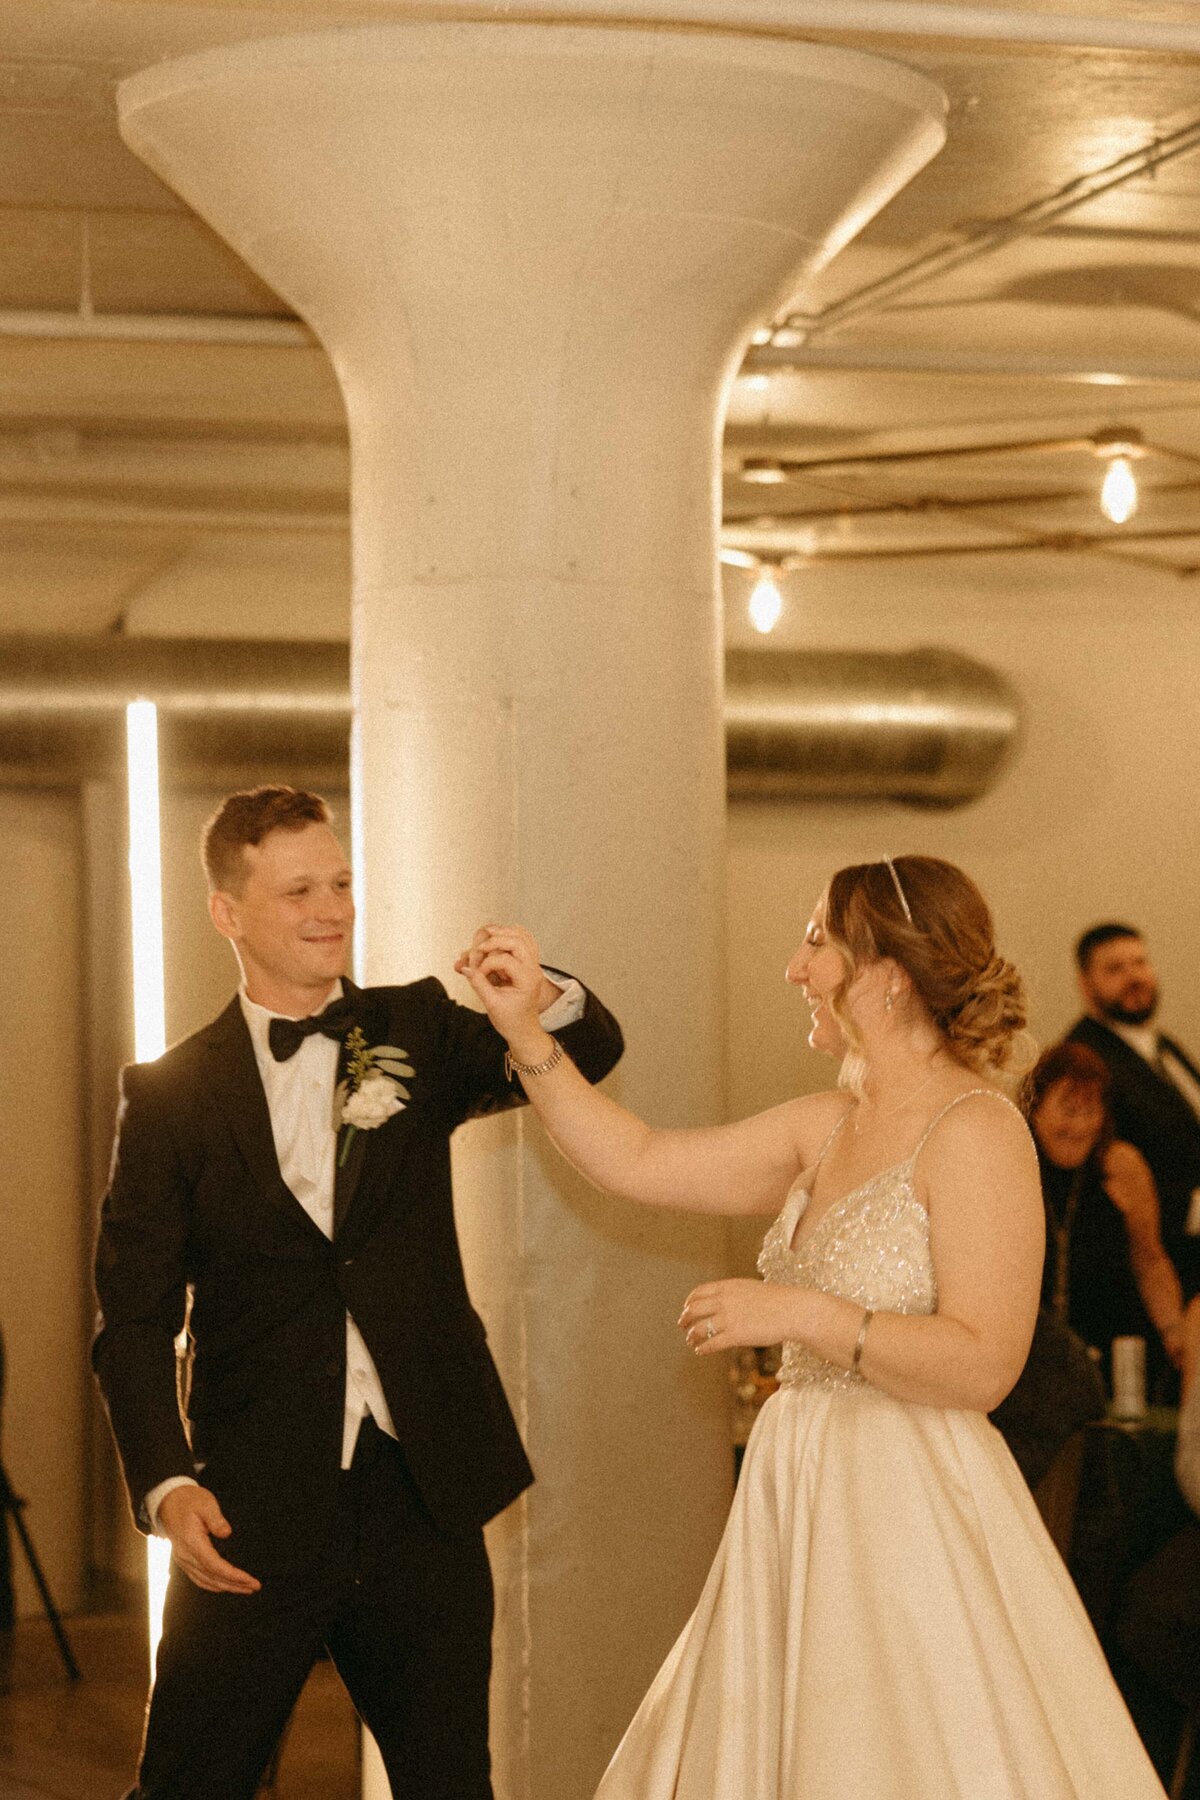 A bride and groom dancing joyfully in a warmly lit hall at a Park Farm Winery wedding, with guests watching in the background. The groom is adjusting the bride's sleeve, both smiling.